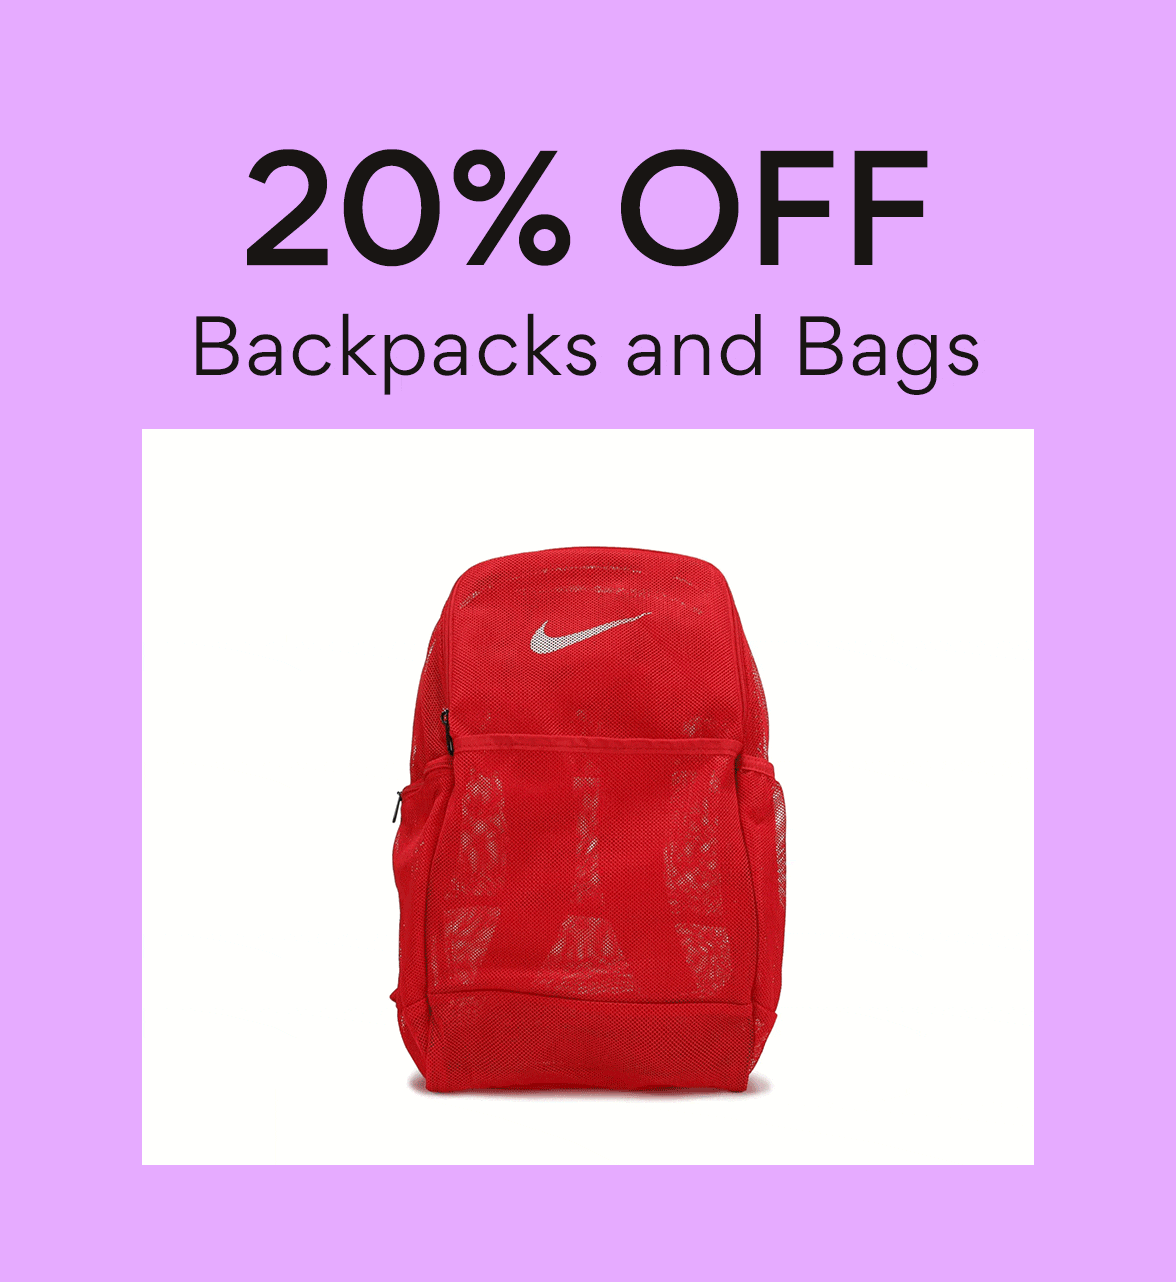 20% off backpacks and bags